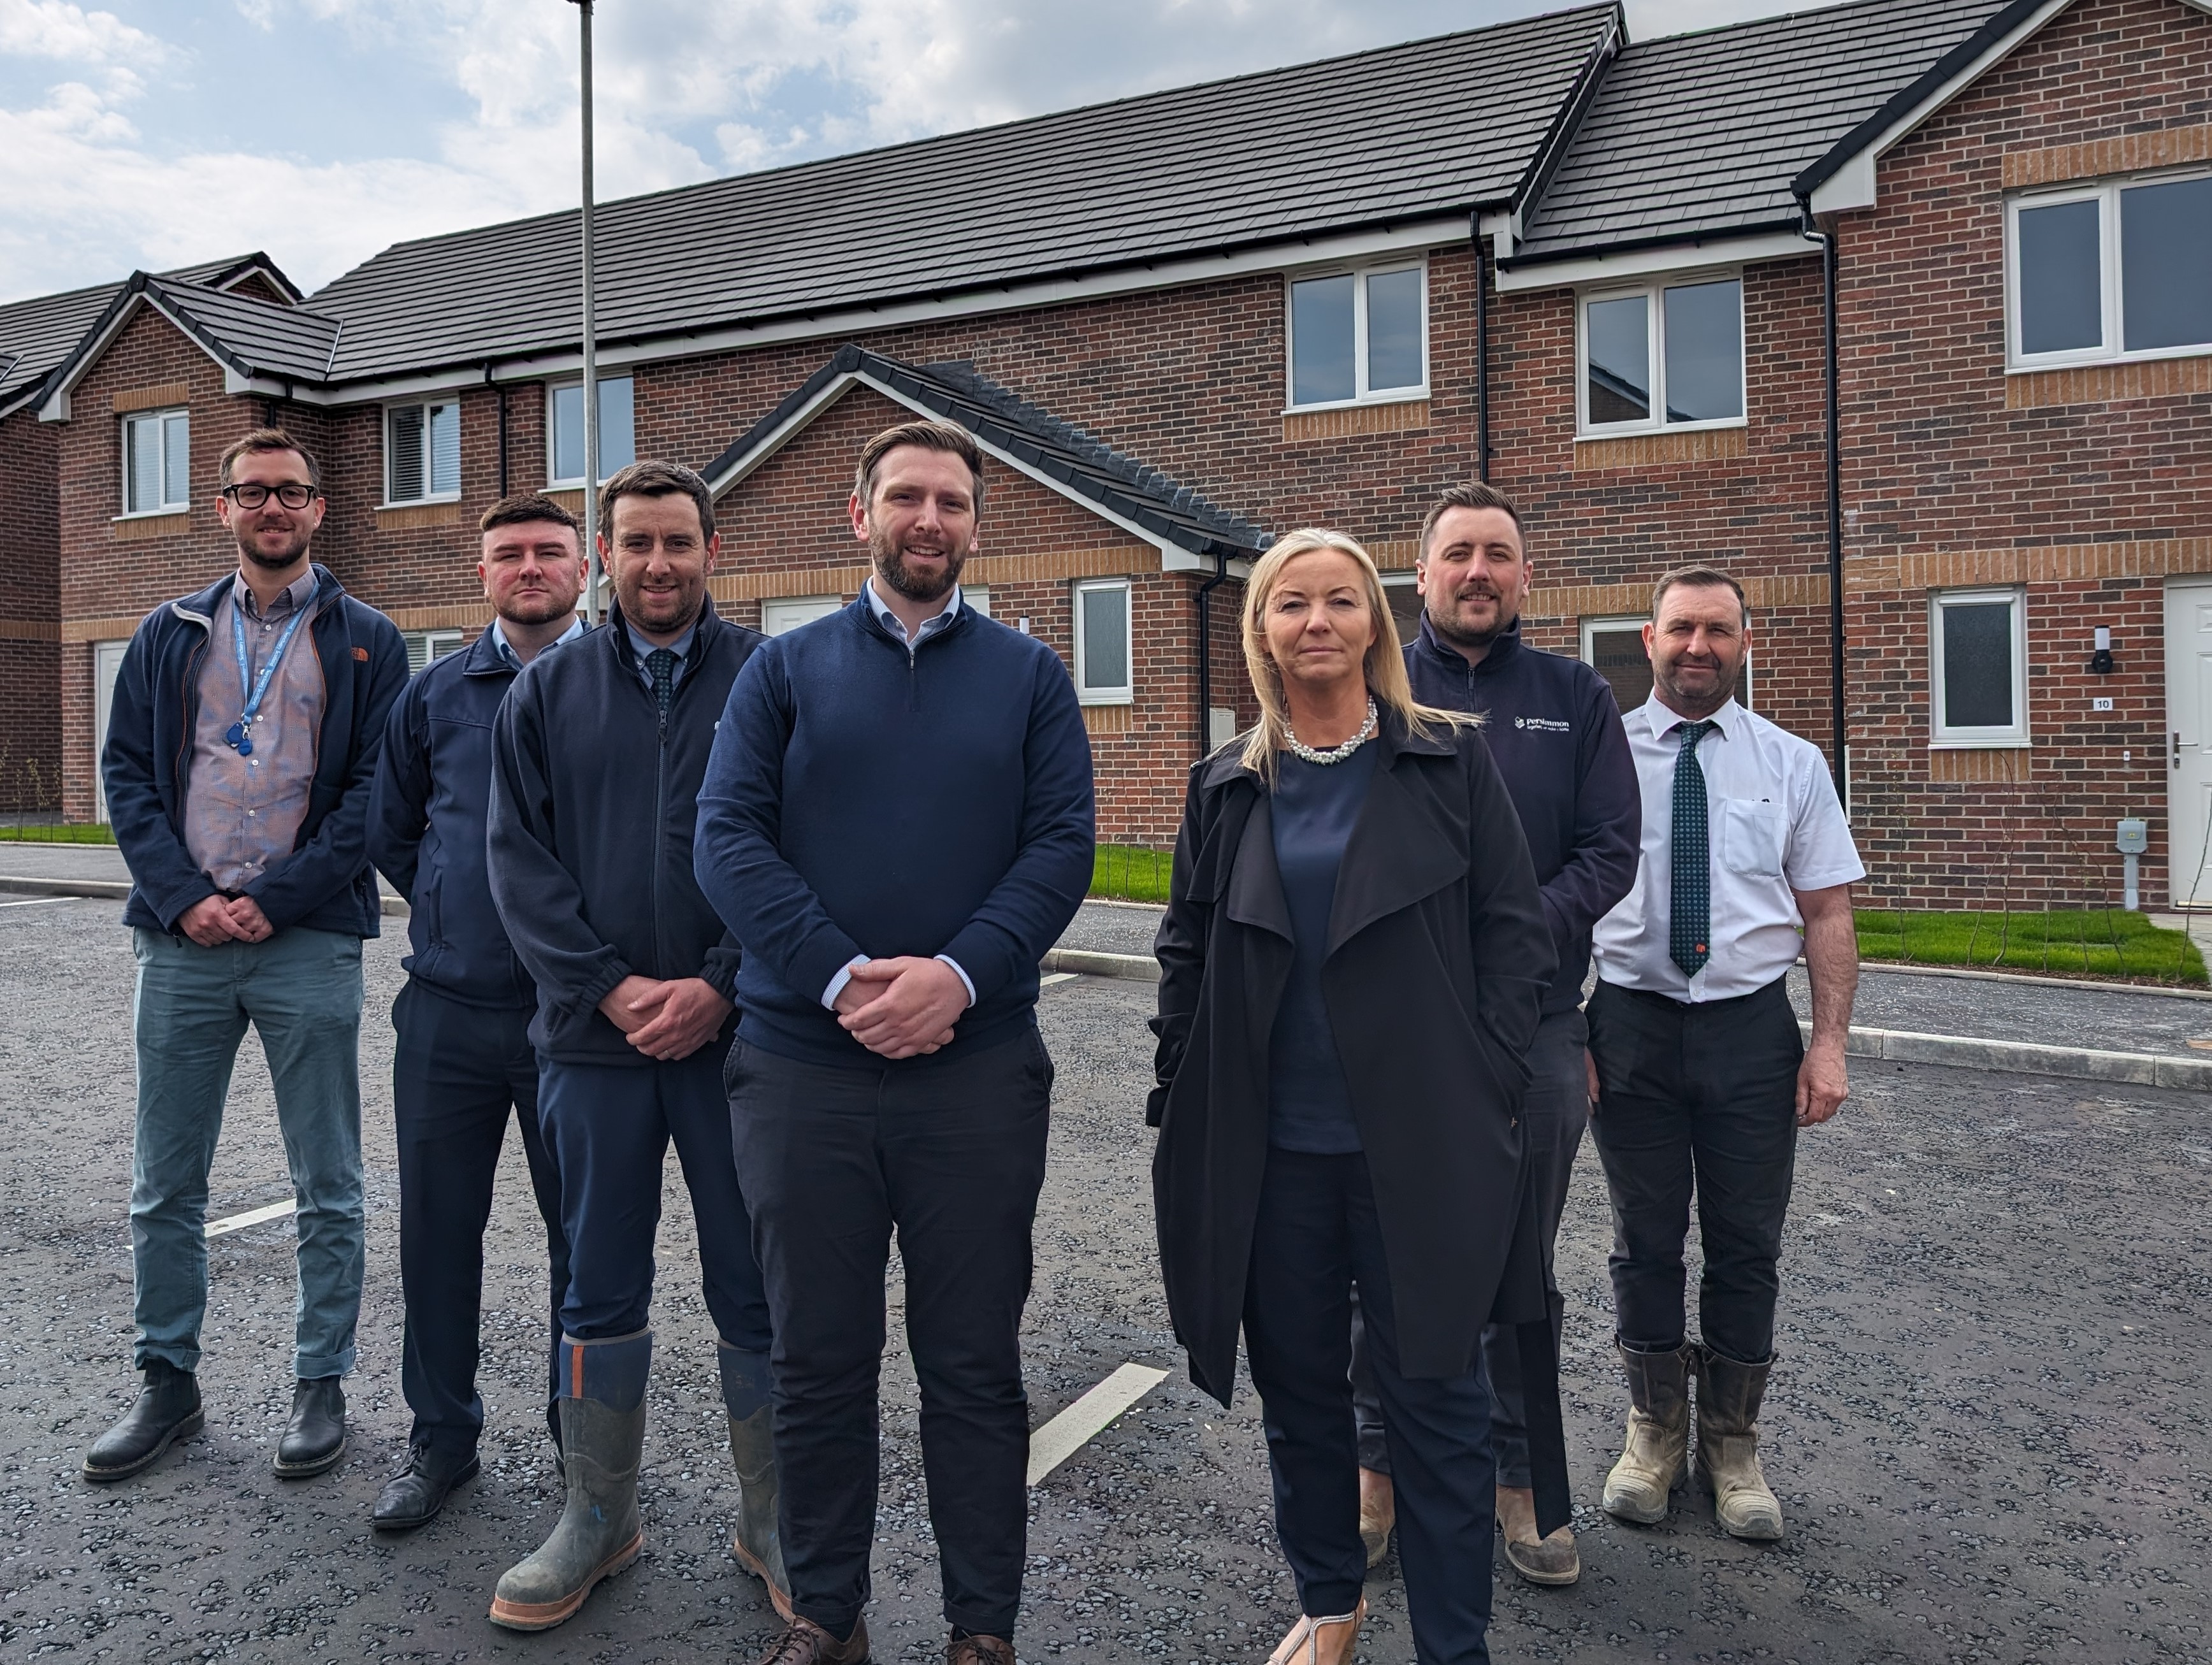 Persimmon hands over seven new homes in Muirhead development to Sanctuary